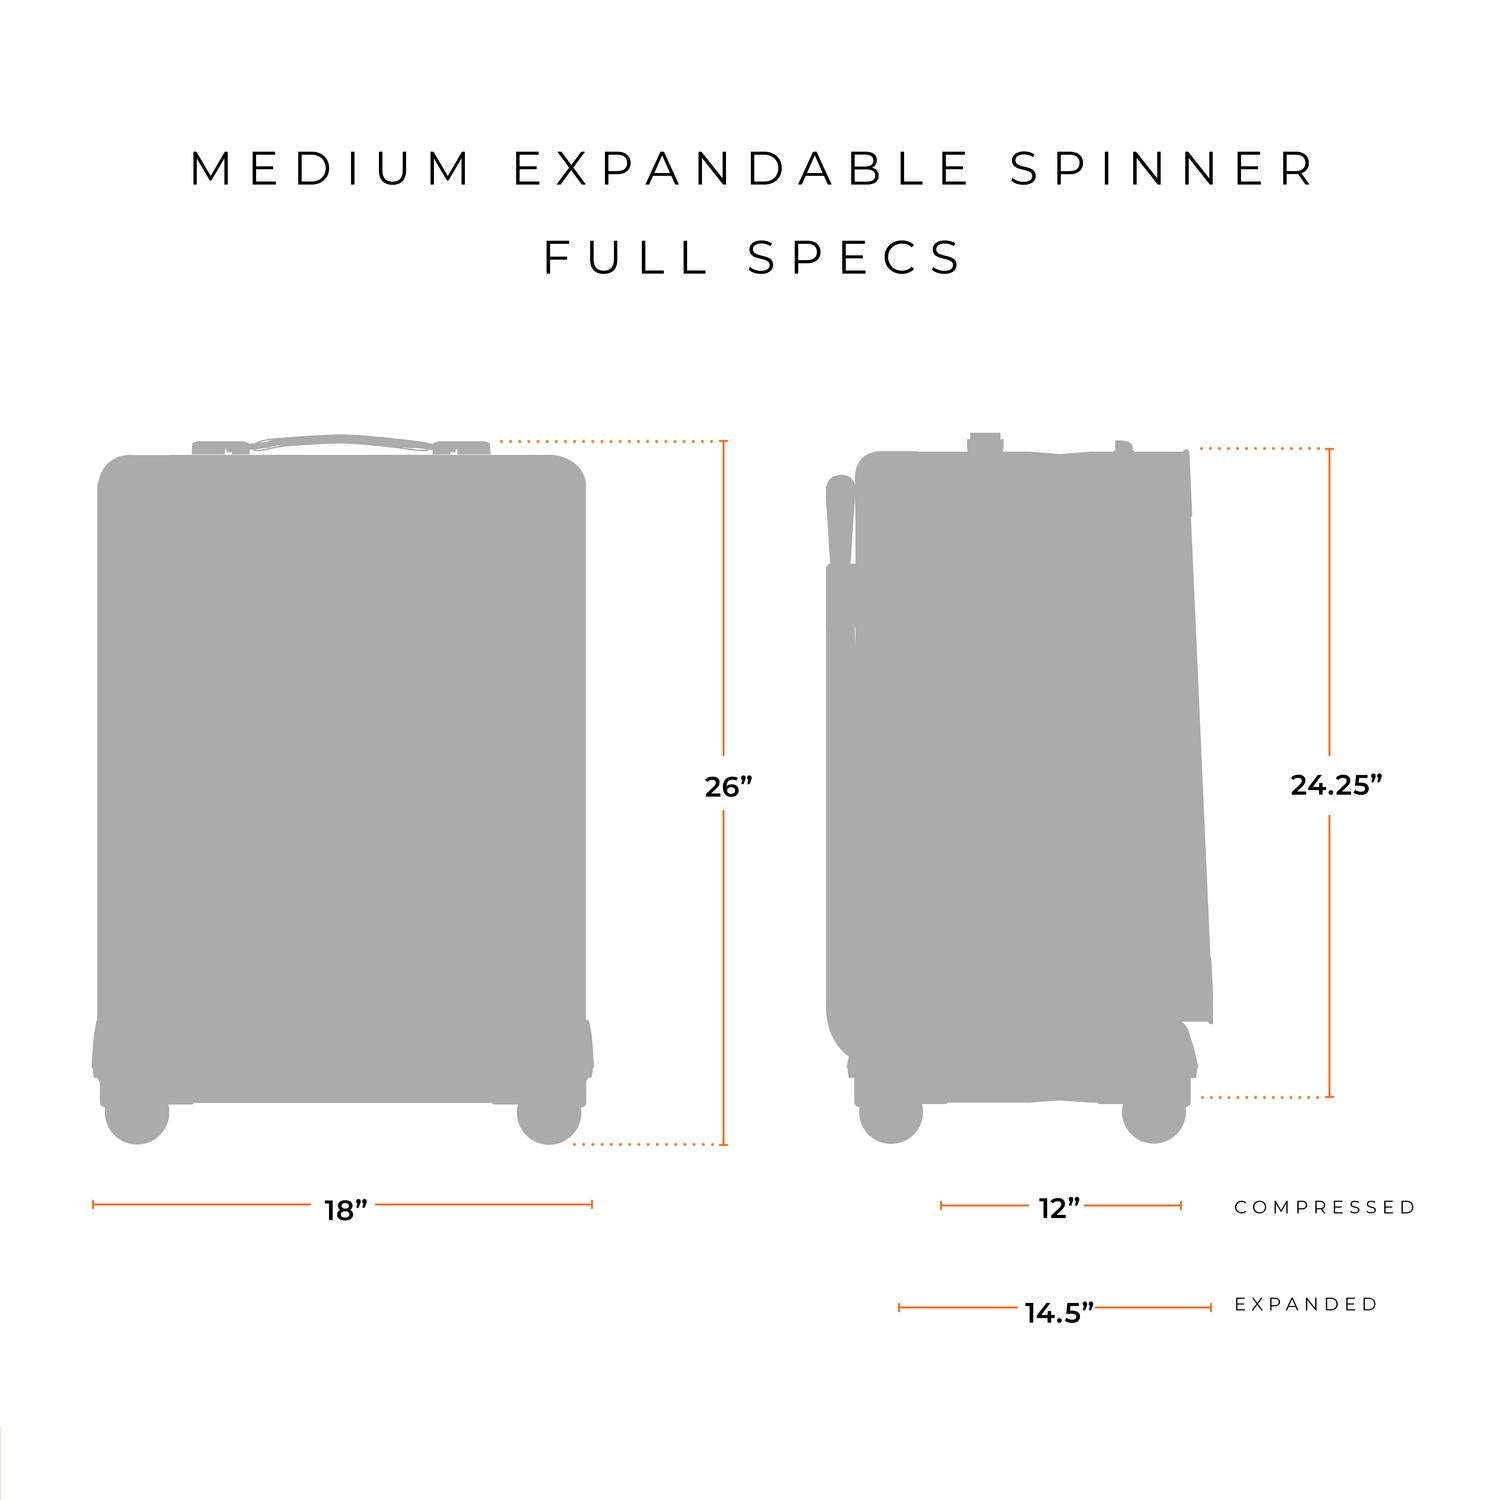 Briggs and Riley Medium Expandable Spinner Full Specs 18"x26"x12" compressed or 14.5" expanded #color_black